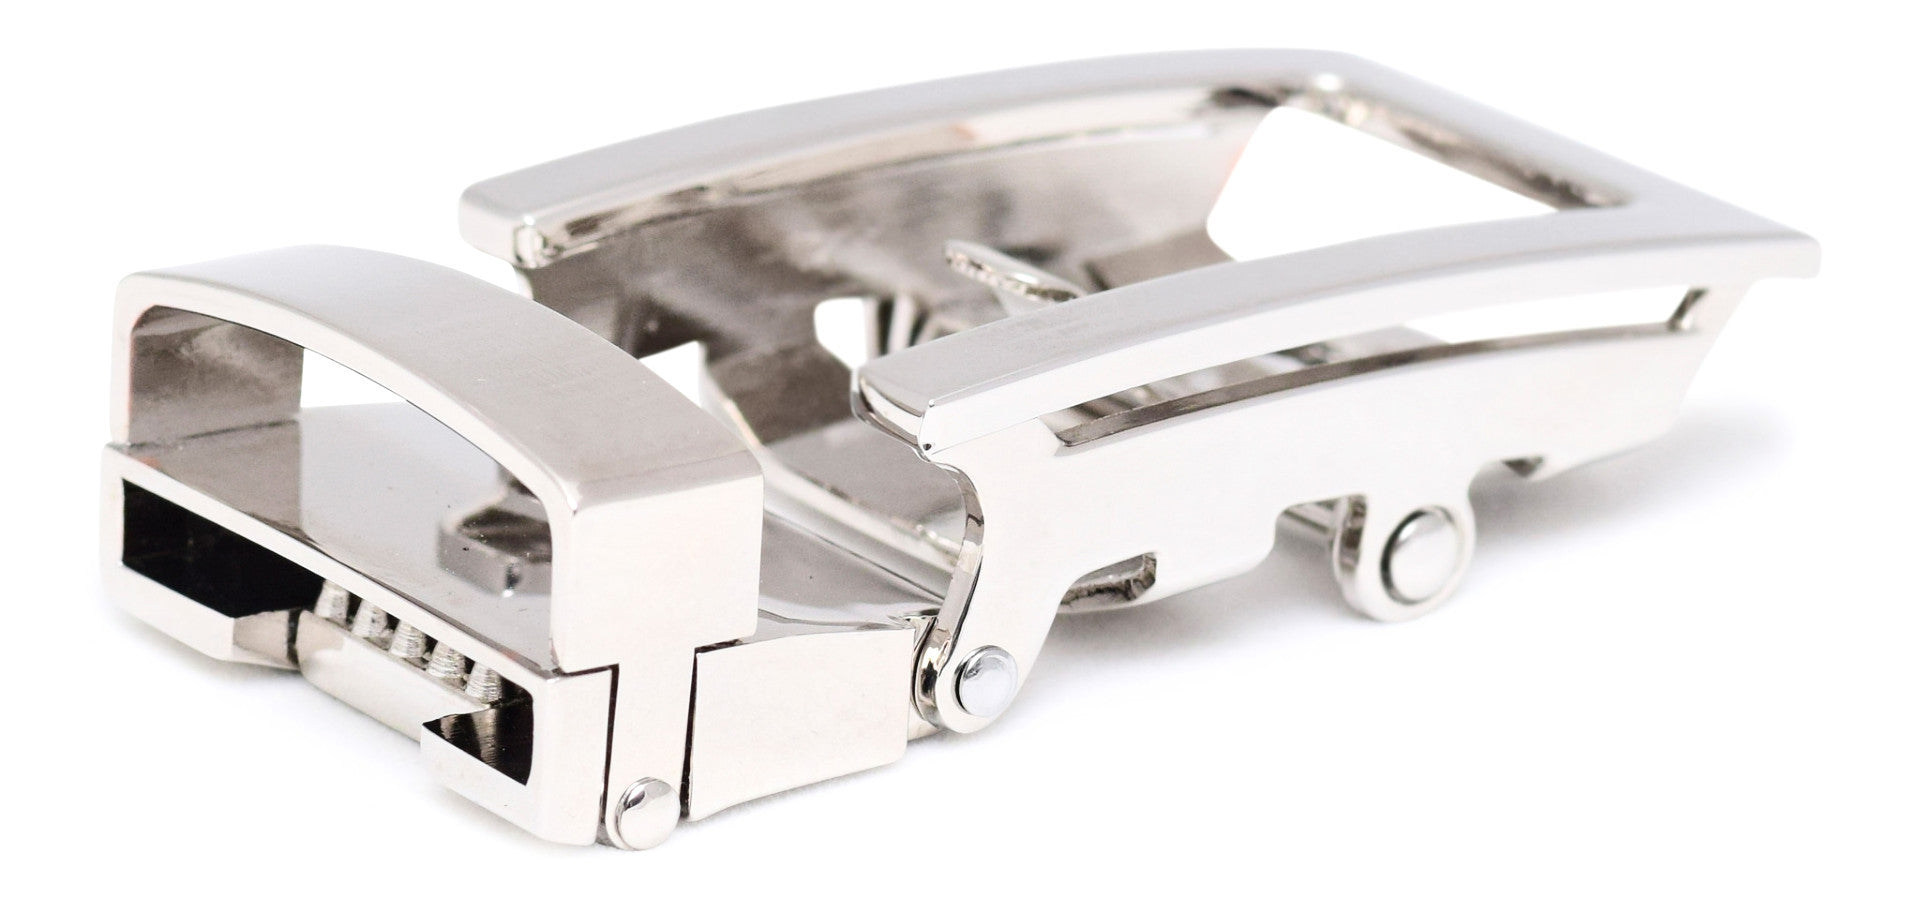 Men's traditional nickel free ratchet belt buckle with a 1.25-inch width, right side view.